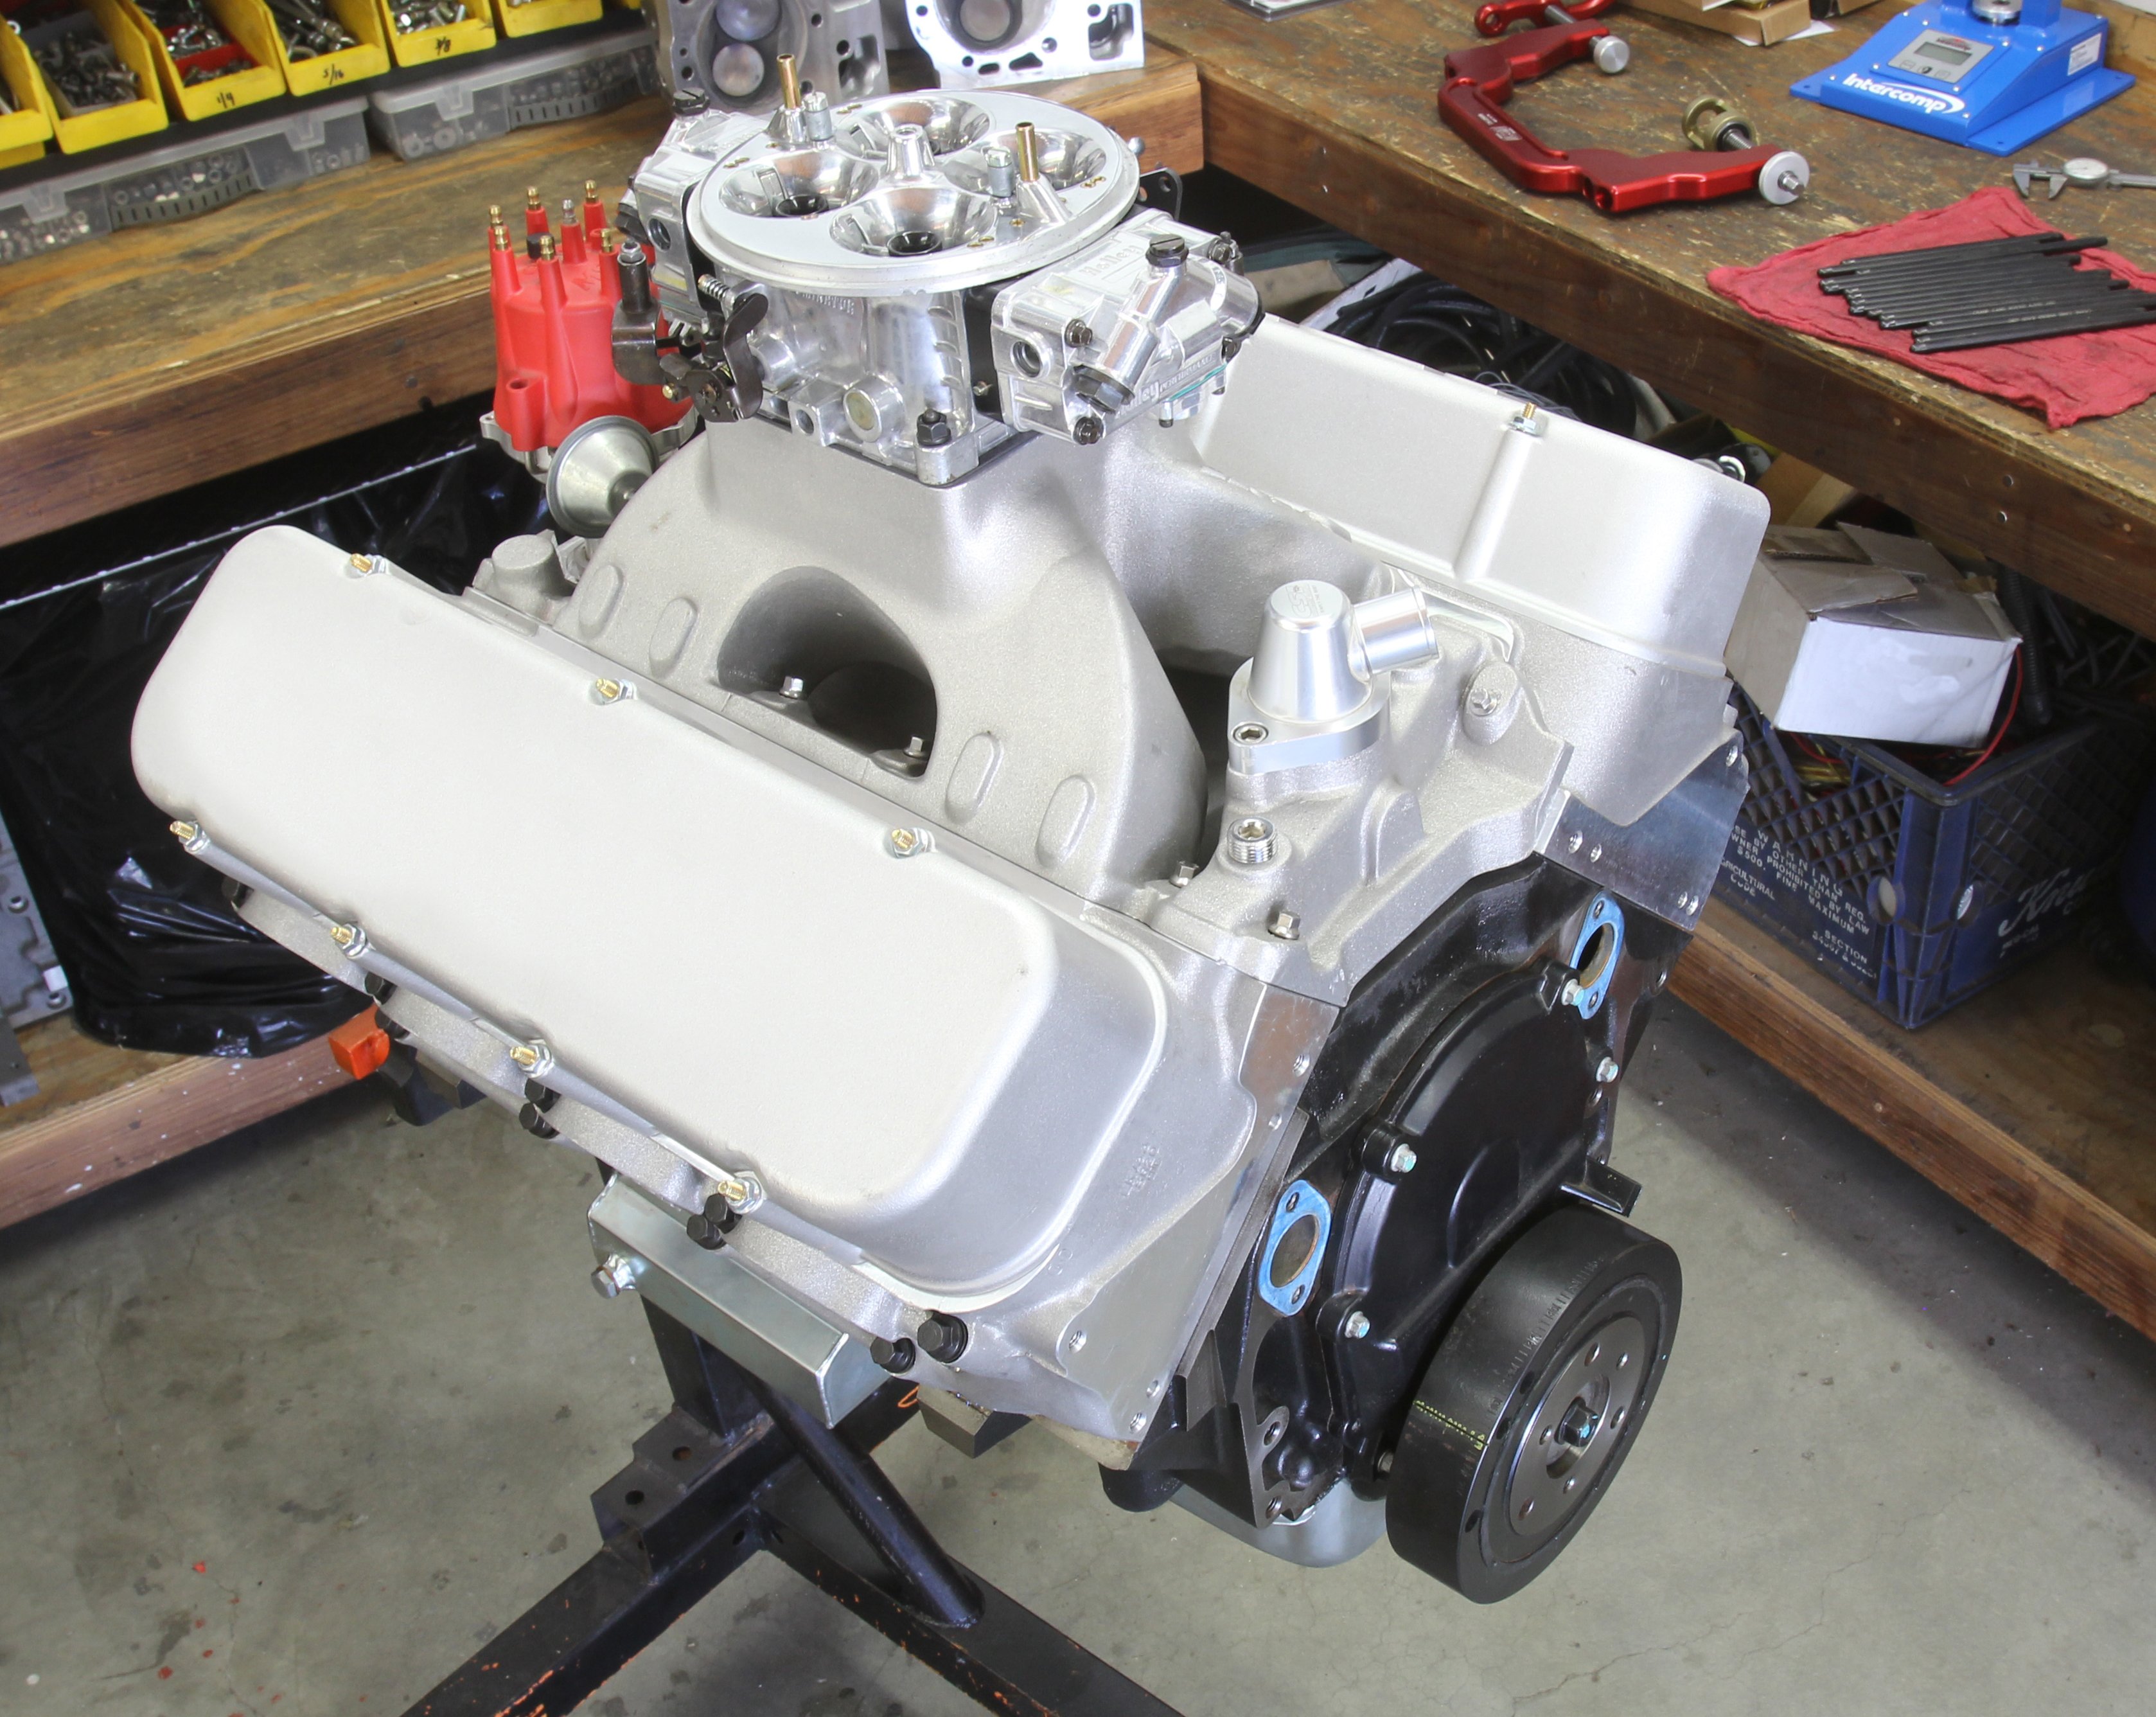 Everything You Wanted to Know About the Big-Block Chevy Engine